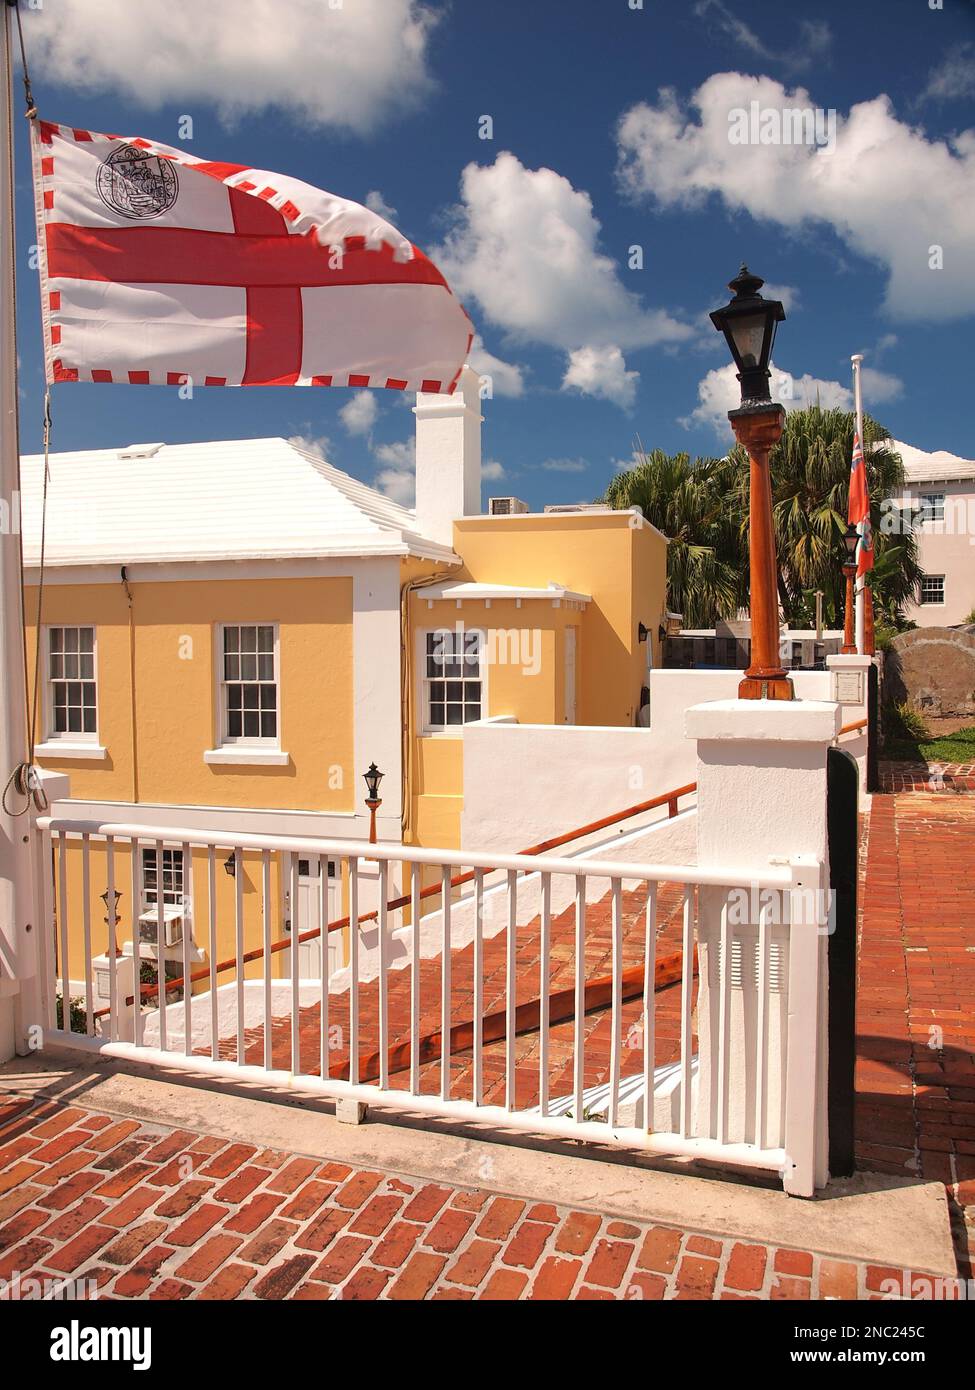 Bermuda scenes around the island, with typical colorful buildings and signage. Stock Photo